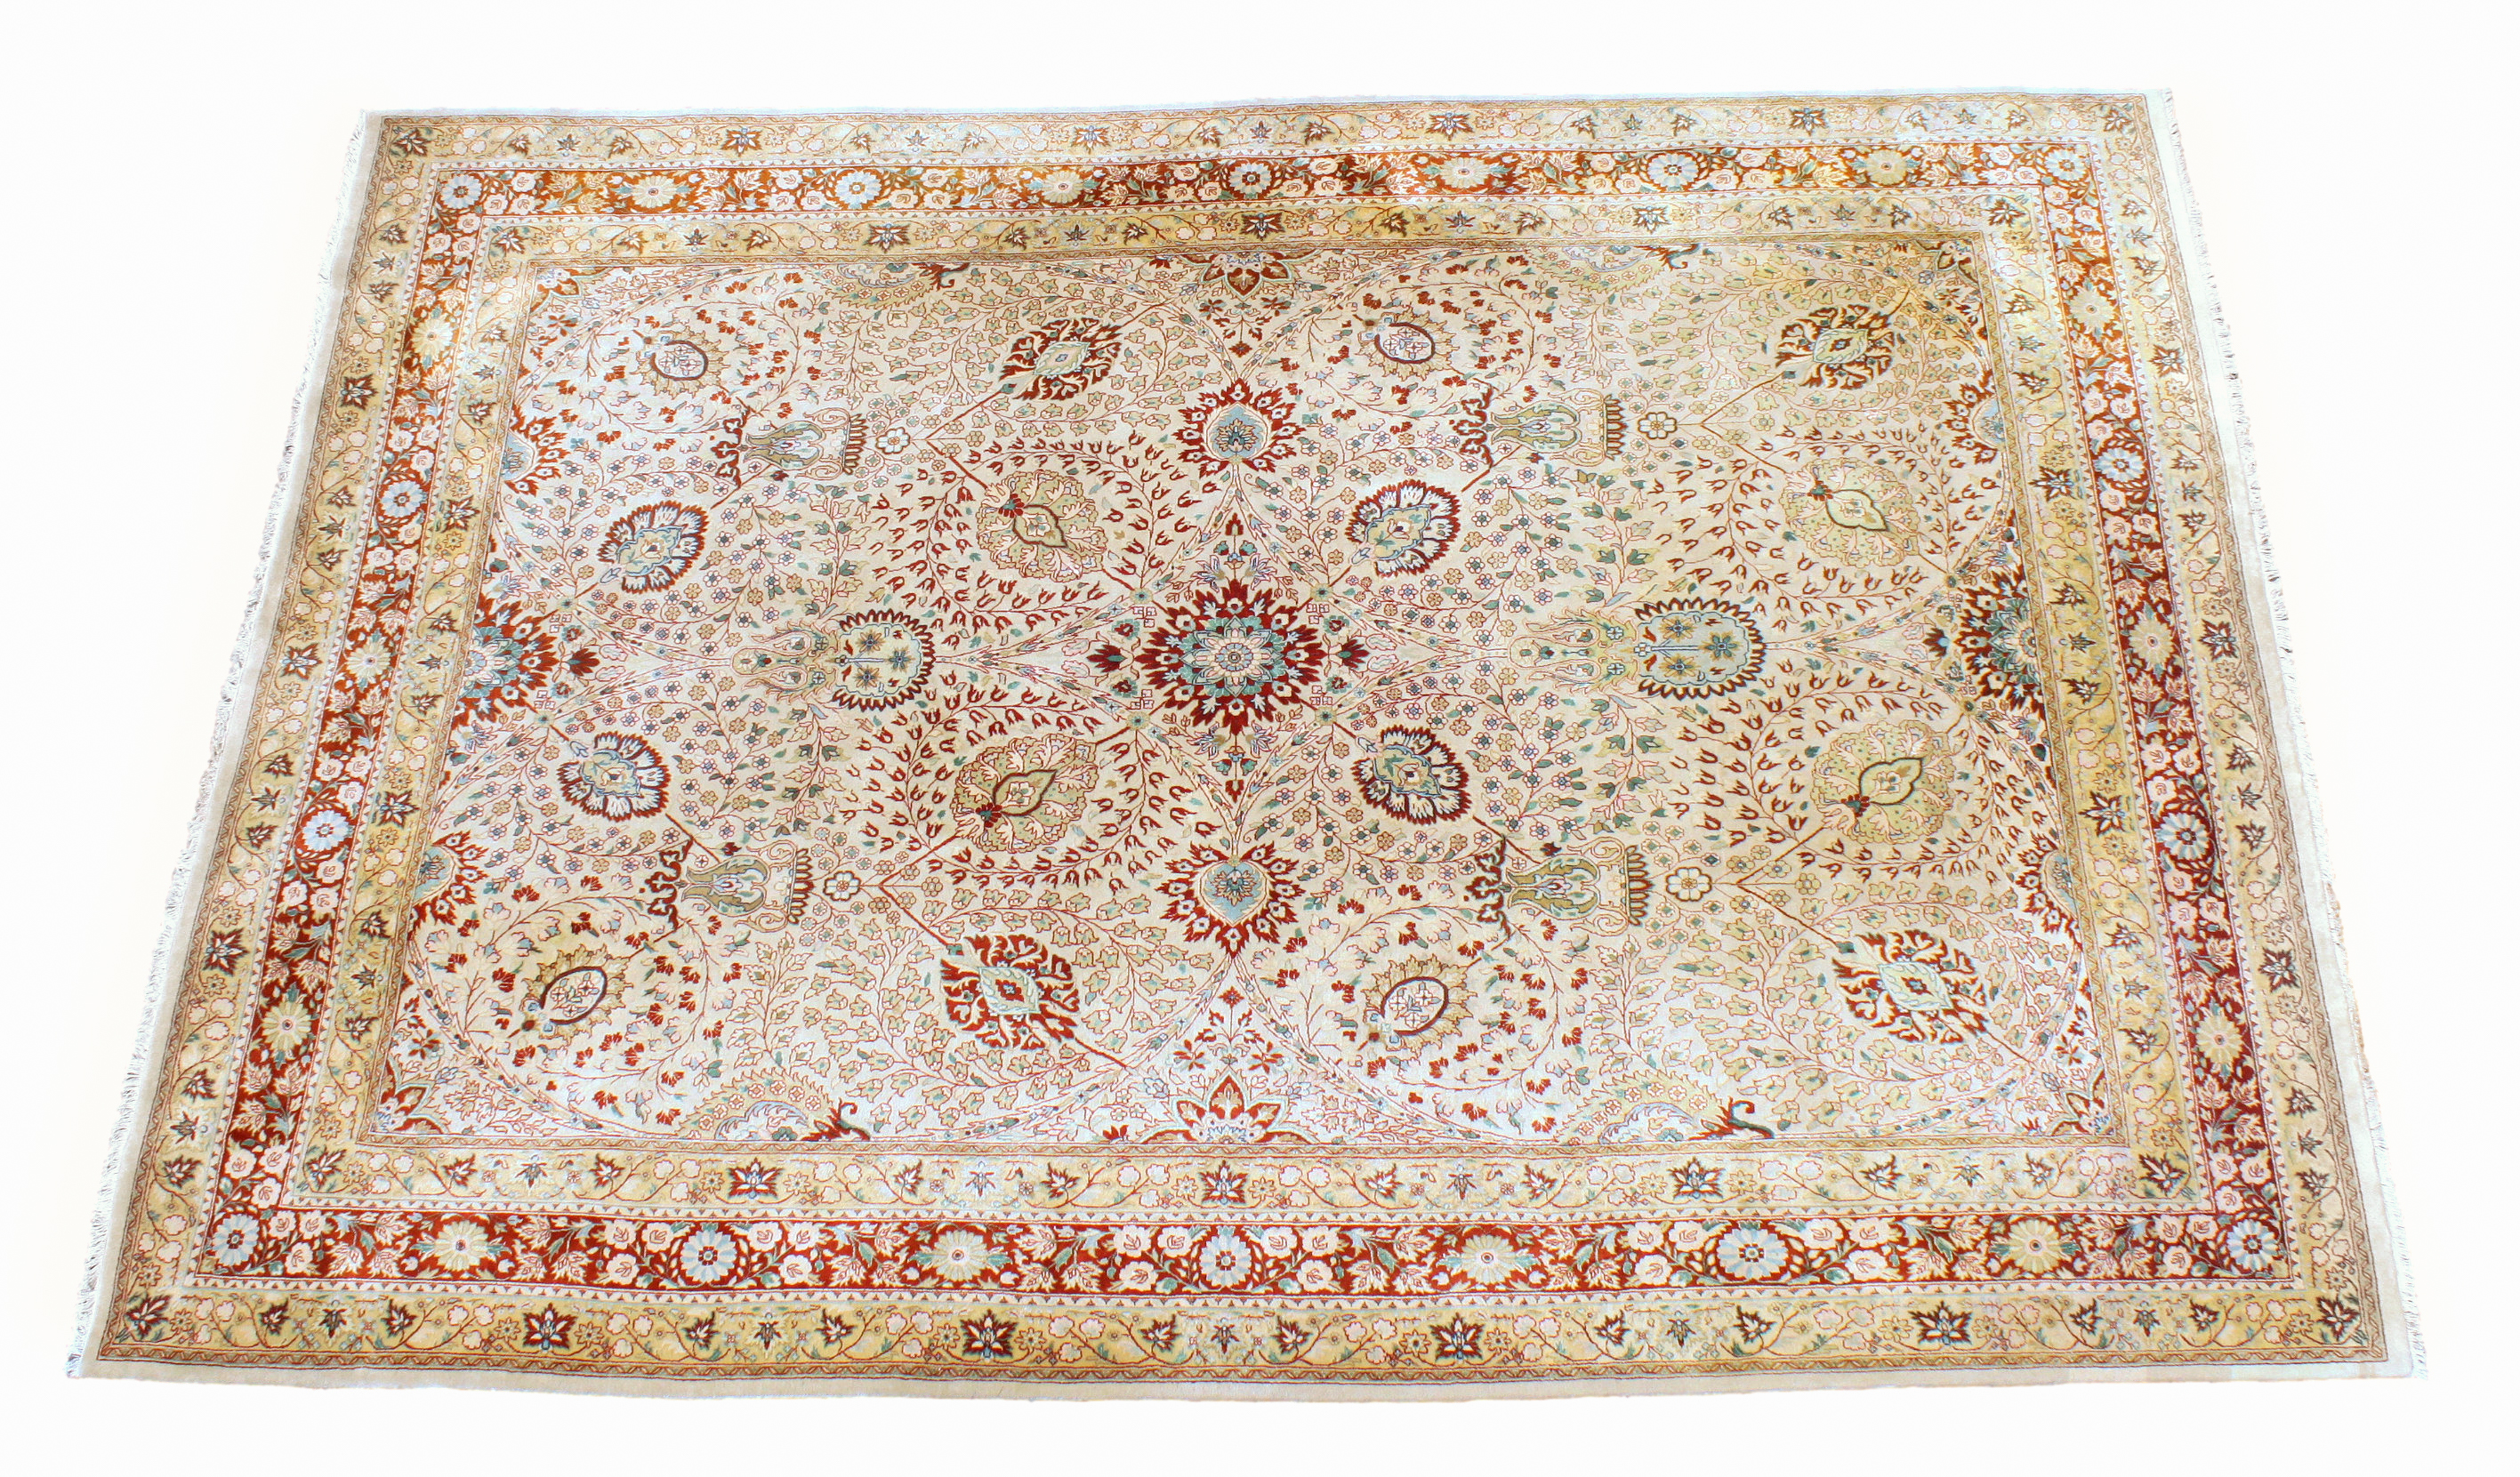 A Qum style rug, purchased from Harrods, late 20th century, the pale buff field with central